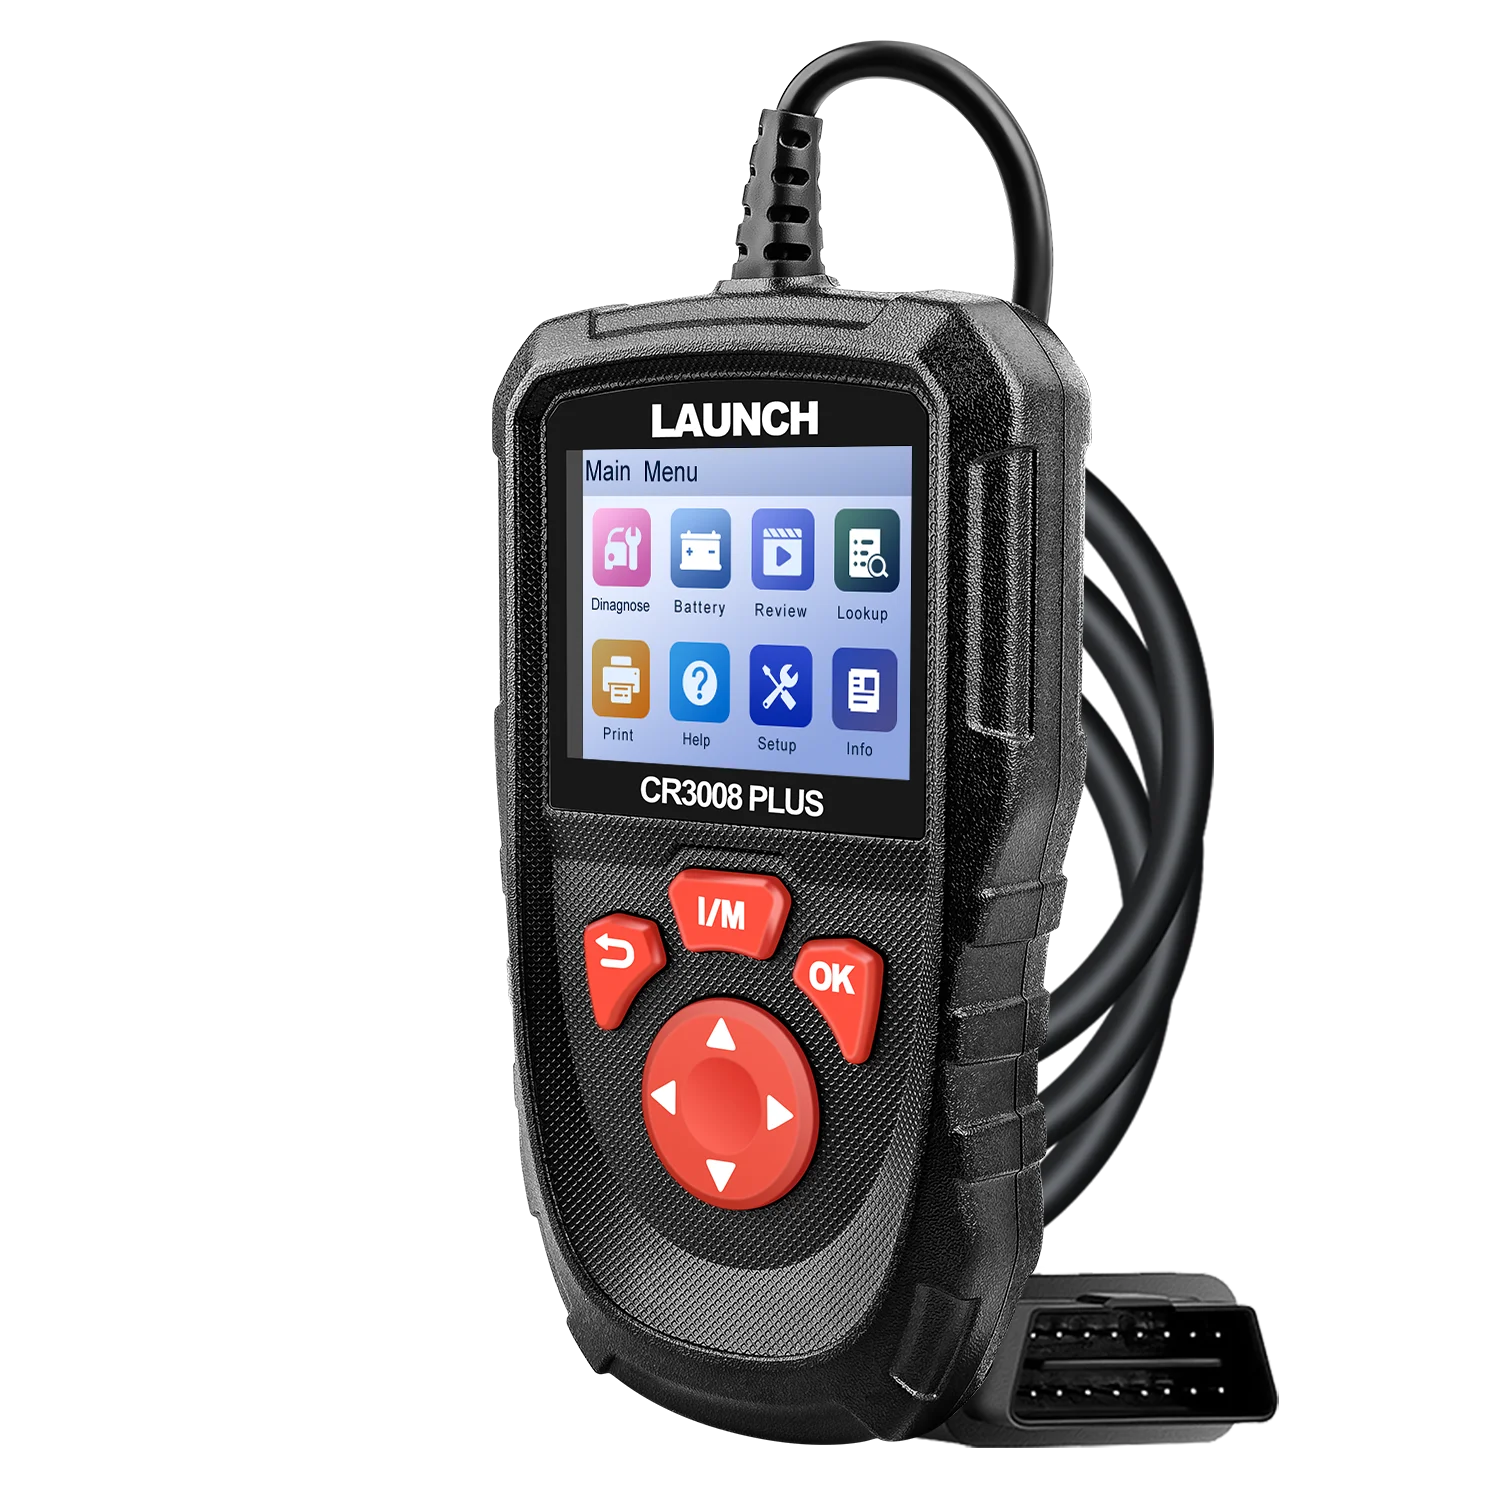 

LAUNCH CR3008 OBD2 Auto Scanner X431 Code Creader CR 3008 OBDII Engine Code Reader PK NT301 KW680 Diagnostic Tool Free Update